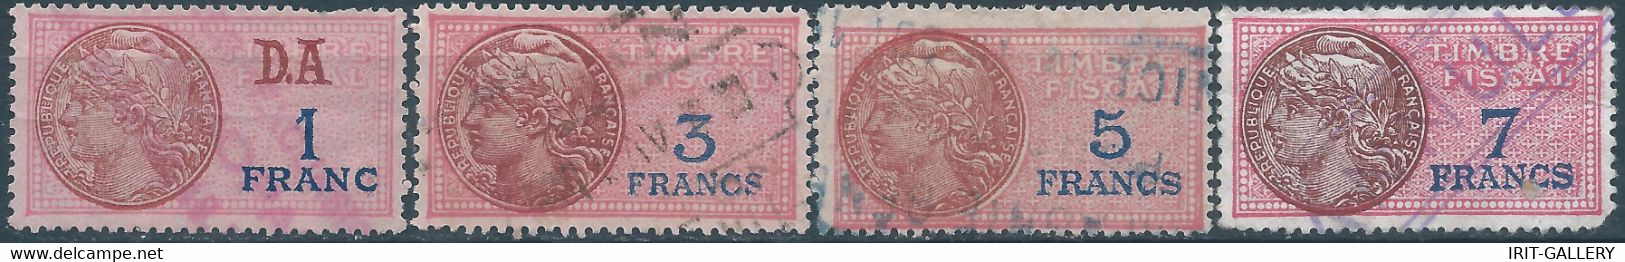 FRANCE,Revenue Stamp Fiscal Tax, 1-3-5-7 Fr,Used - Zegels